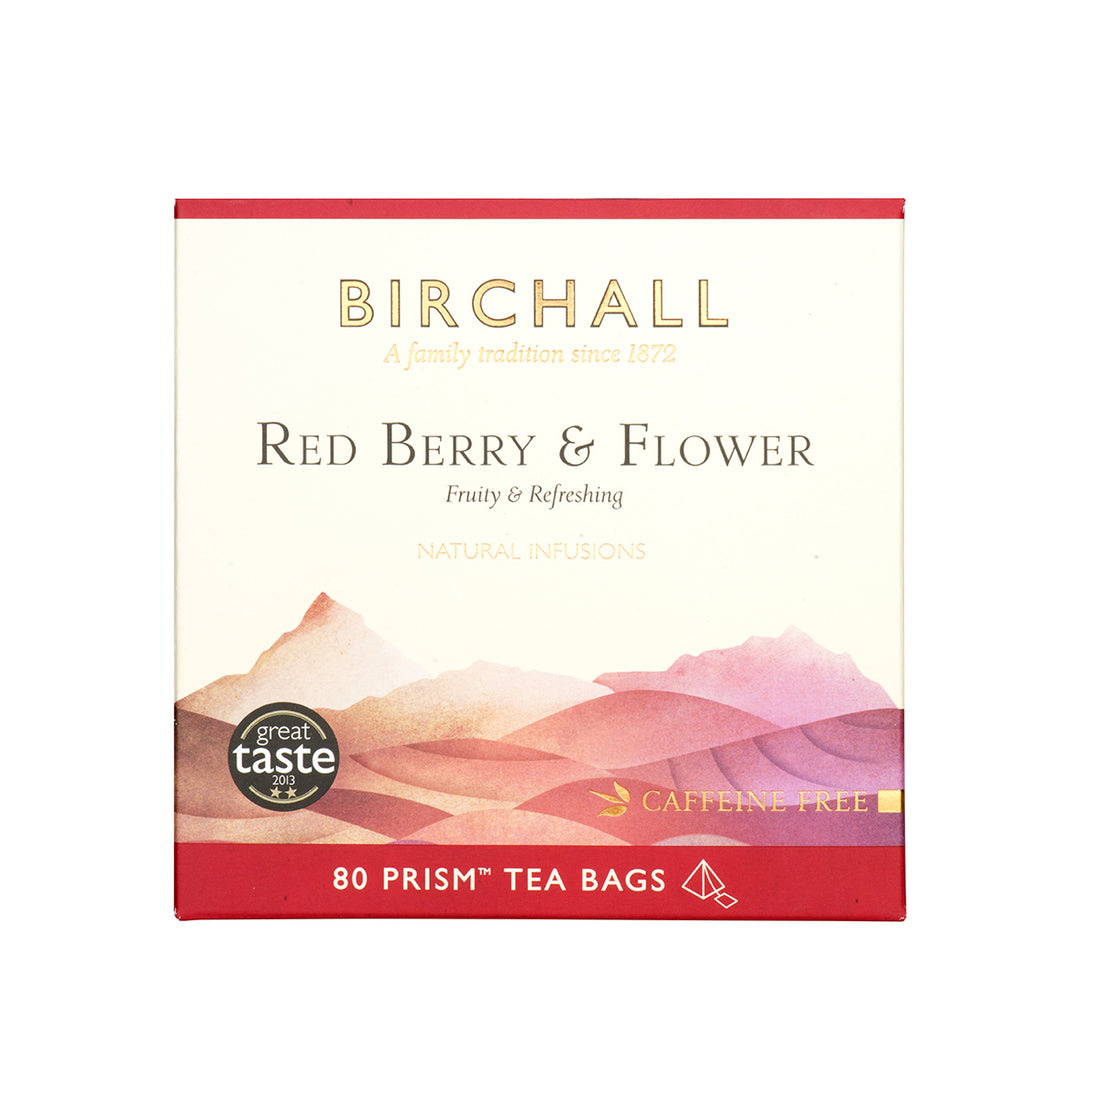 Birchall, Birchall Plant-Based Prism Tea Bags 80pcs - Red Berry & Flower, Redber Coffee